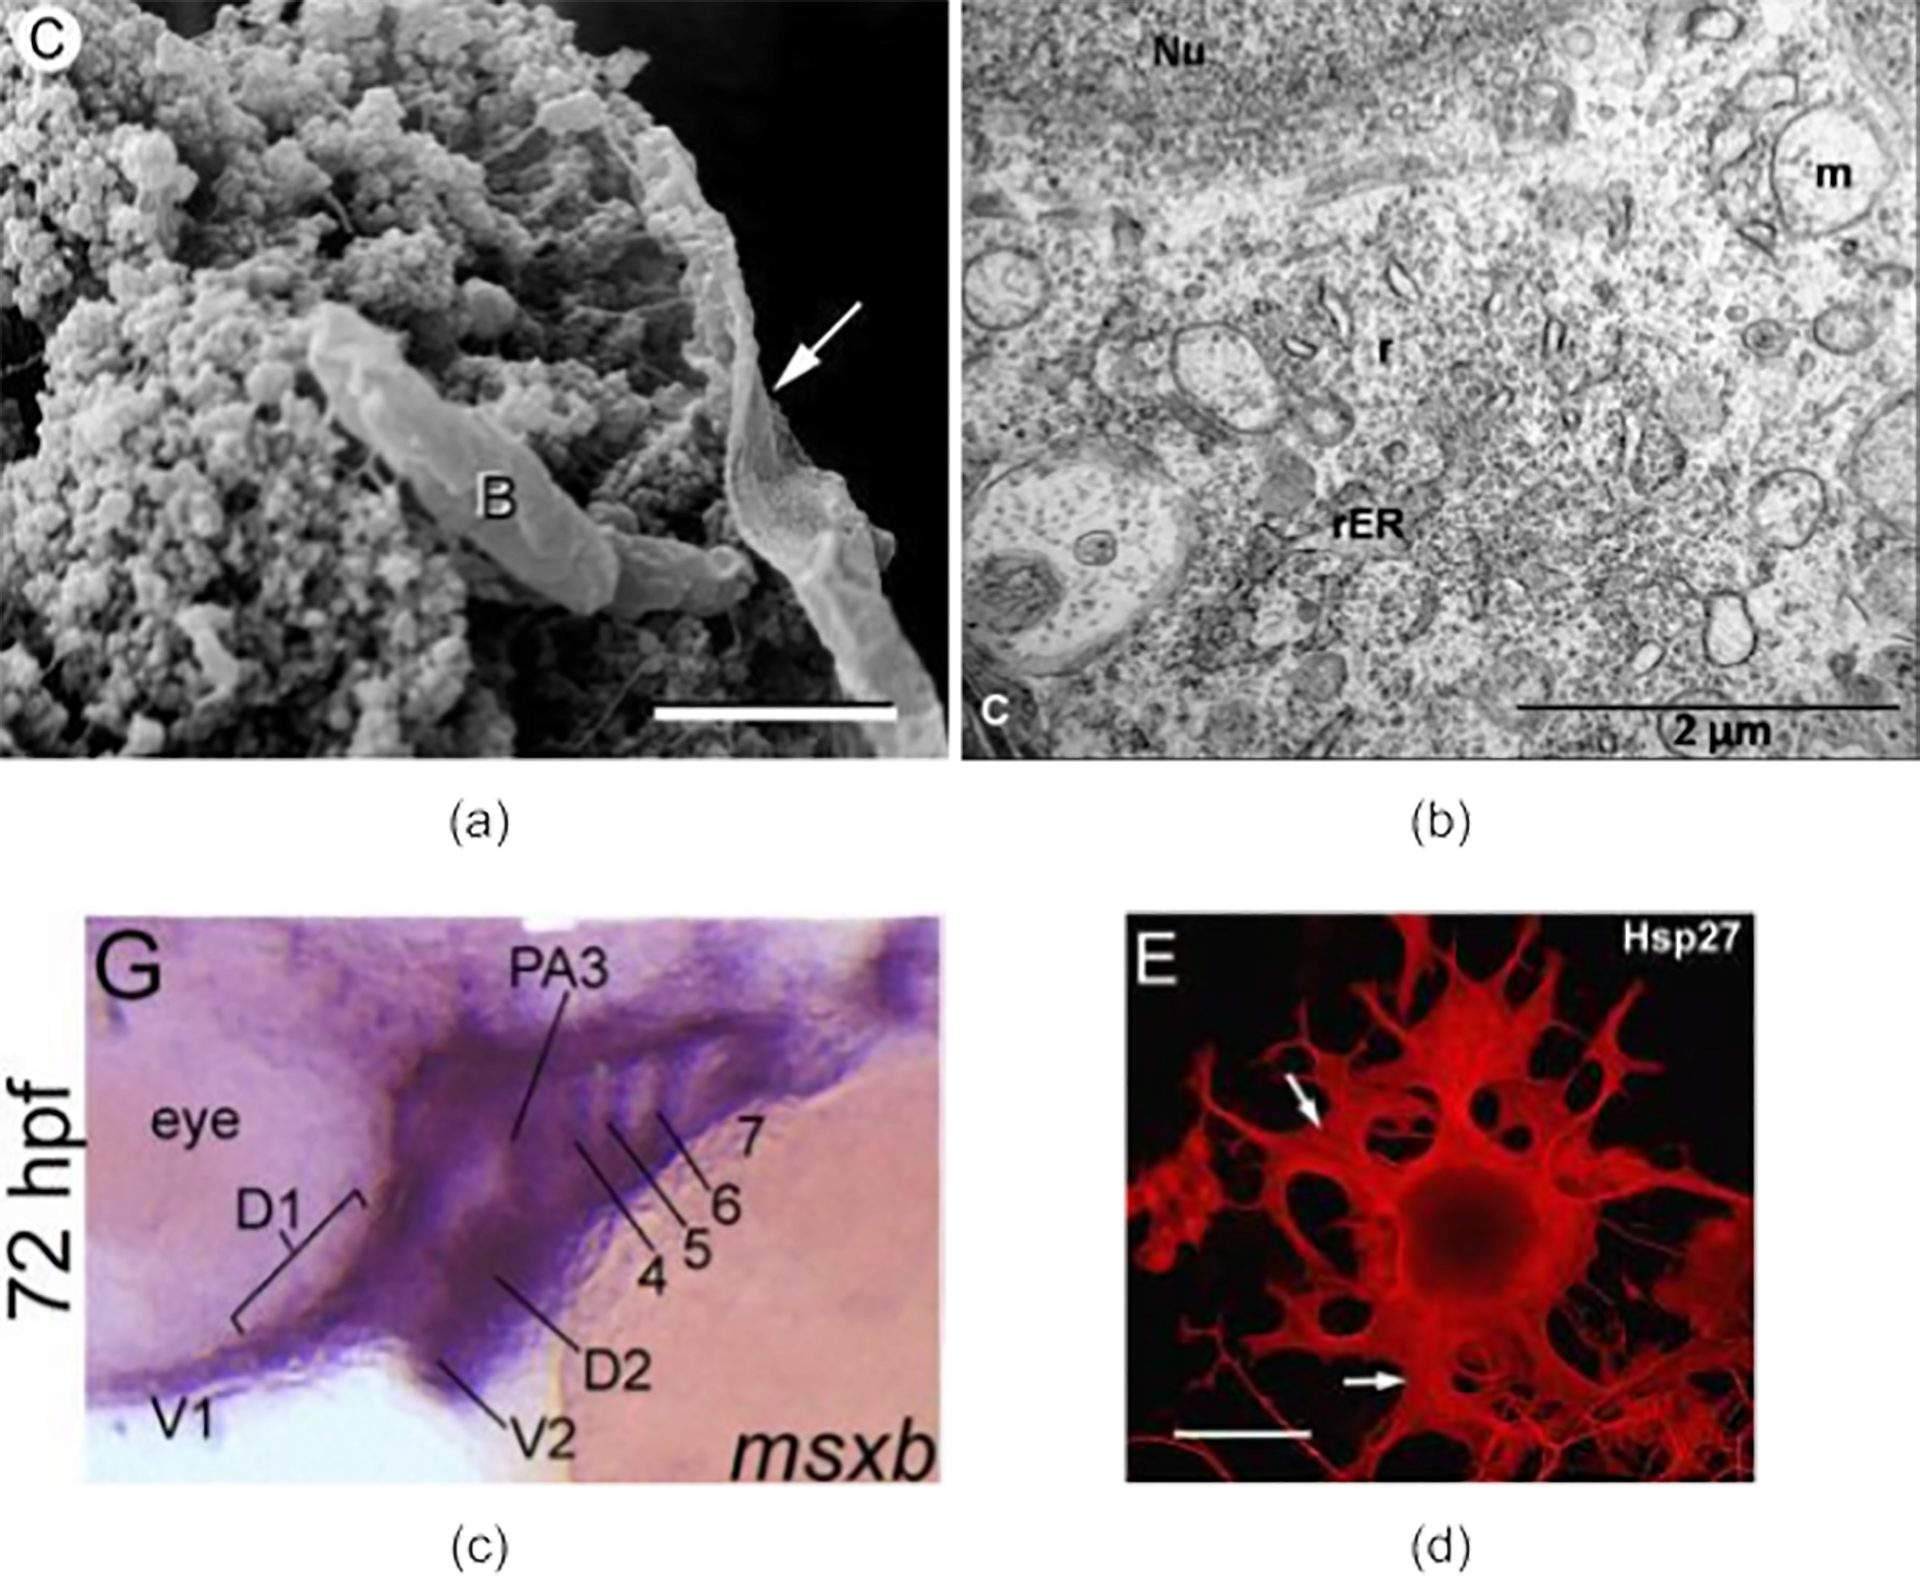 Four microscopy images from the ImageCLEF dataset showcasing different modalities: (a) Electron microscopy (DMEL), (b) Transmission microscopy (DMTR), (c) Light microscopy (DMLI), and (d) Fluorescence microscopy (DMFL).